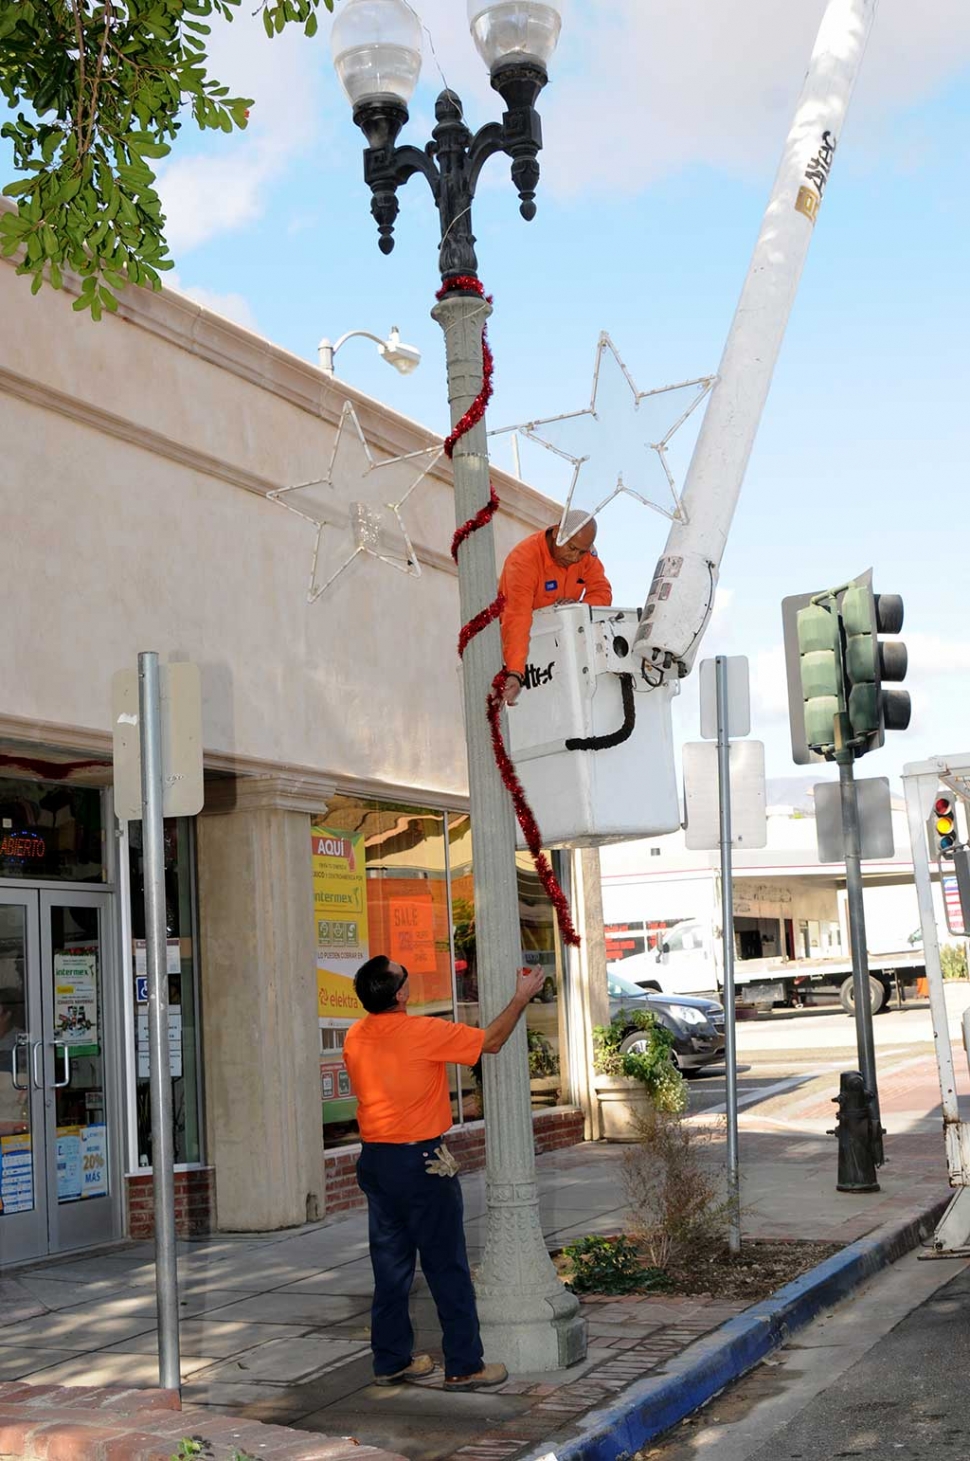 The City of Fillmore is getting into the Christmas Spirit! On Monday morning city employees were spotted downtown decorating the light poles with garland and giant stars to get ready for the Christmas Season, as well as for the Annual Lion’s Club Christmas Parade which will take place this Saturday, December 2nd at 10am in downtown Fillmore.